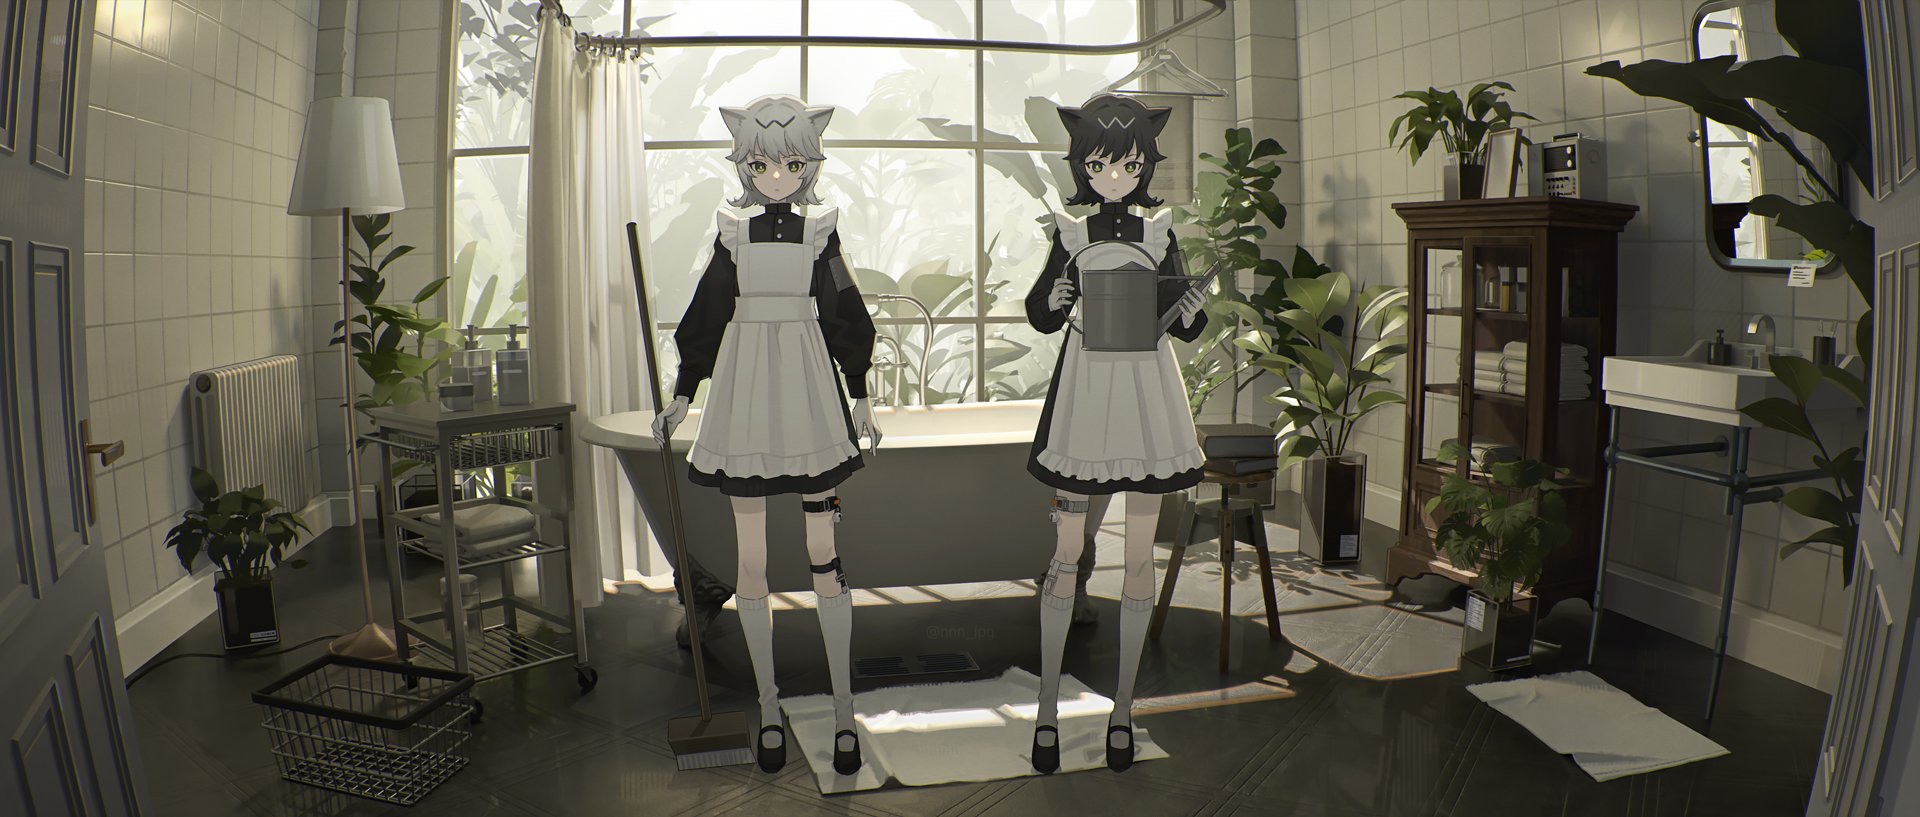 Anime 1920x817 maid cat ears anime girls two women maid outfit interior looking at viewer leaves plants lamp broom short hair cat girl window bathtub bathroom